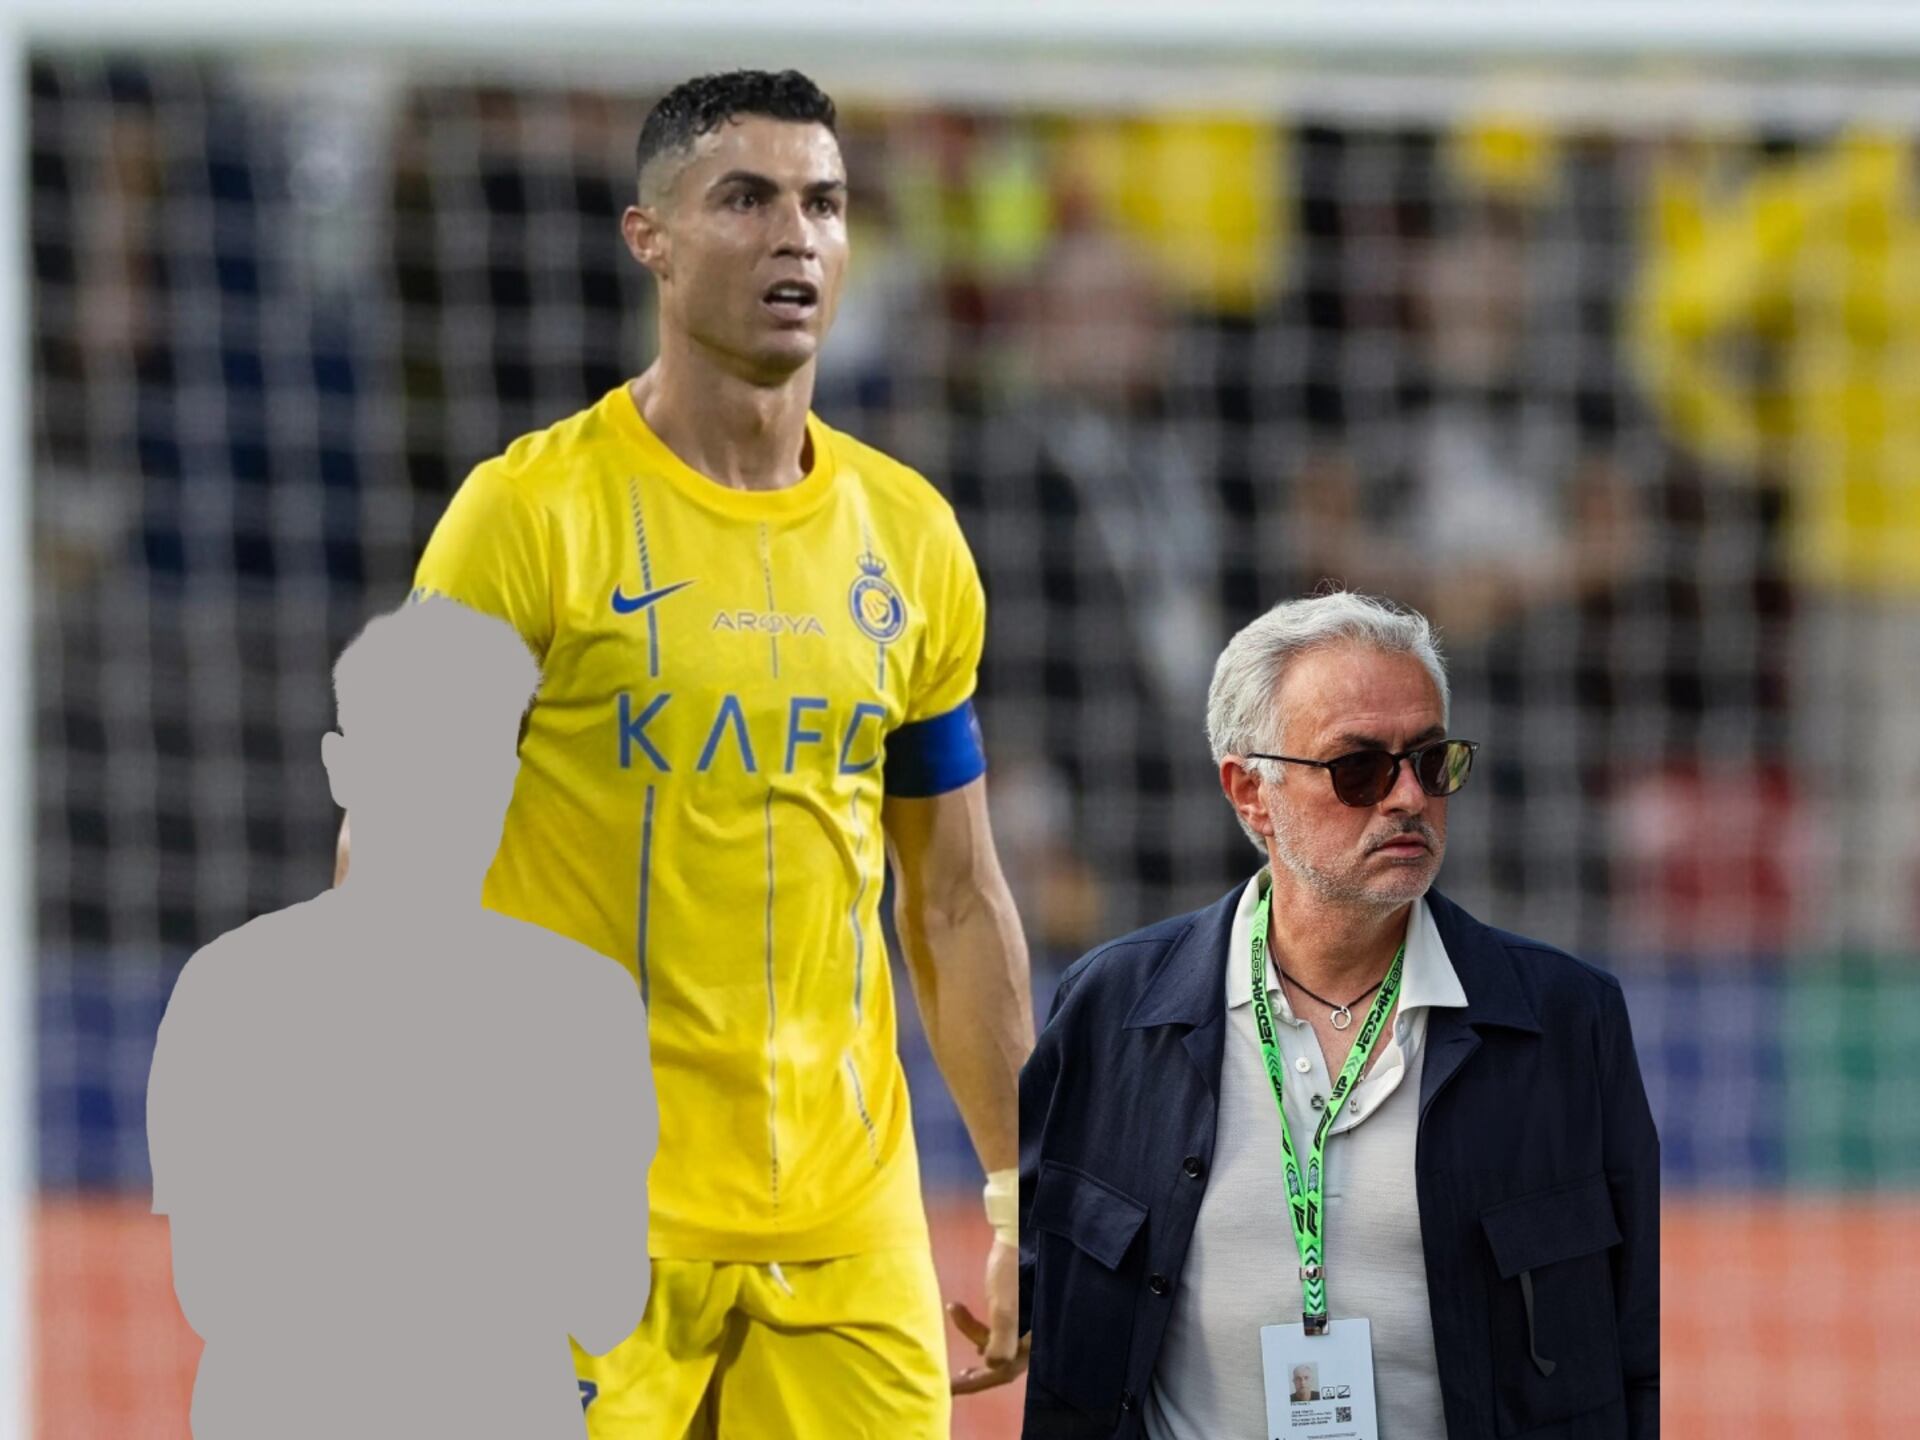 Not only they want to bring Mourinho to please Cristiano, the $70M Portuguese teammate that Al Nassr wants to sign